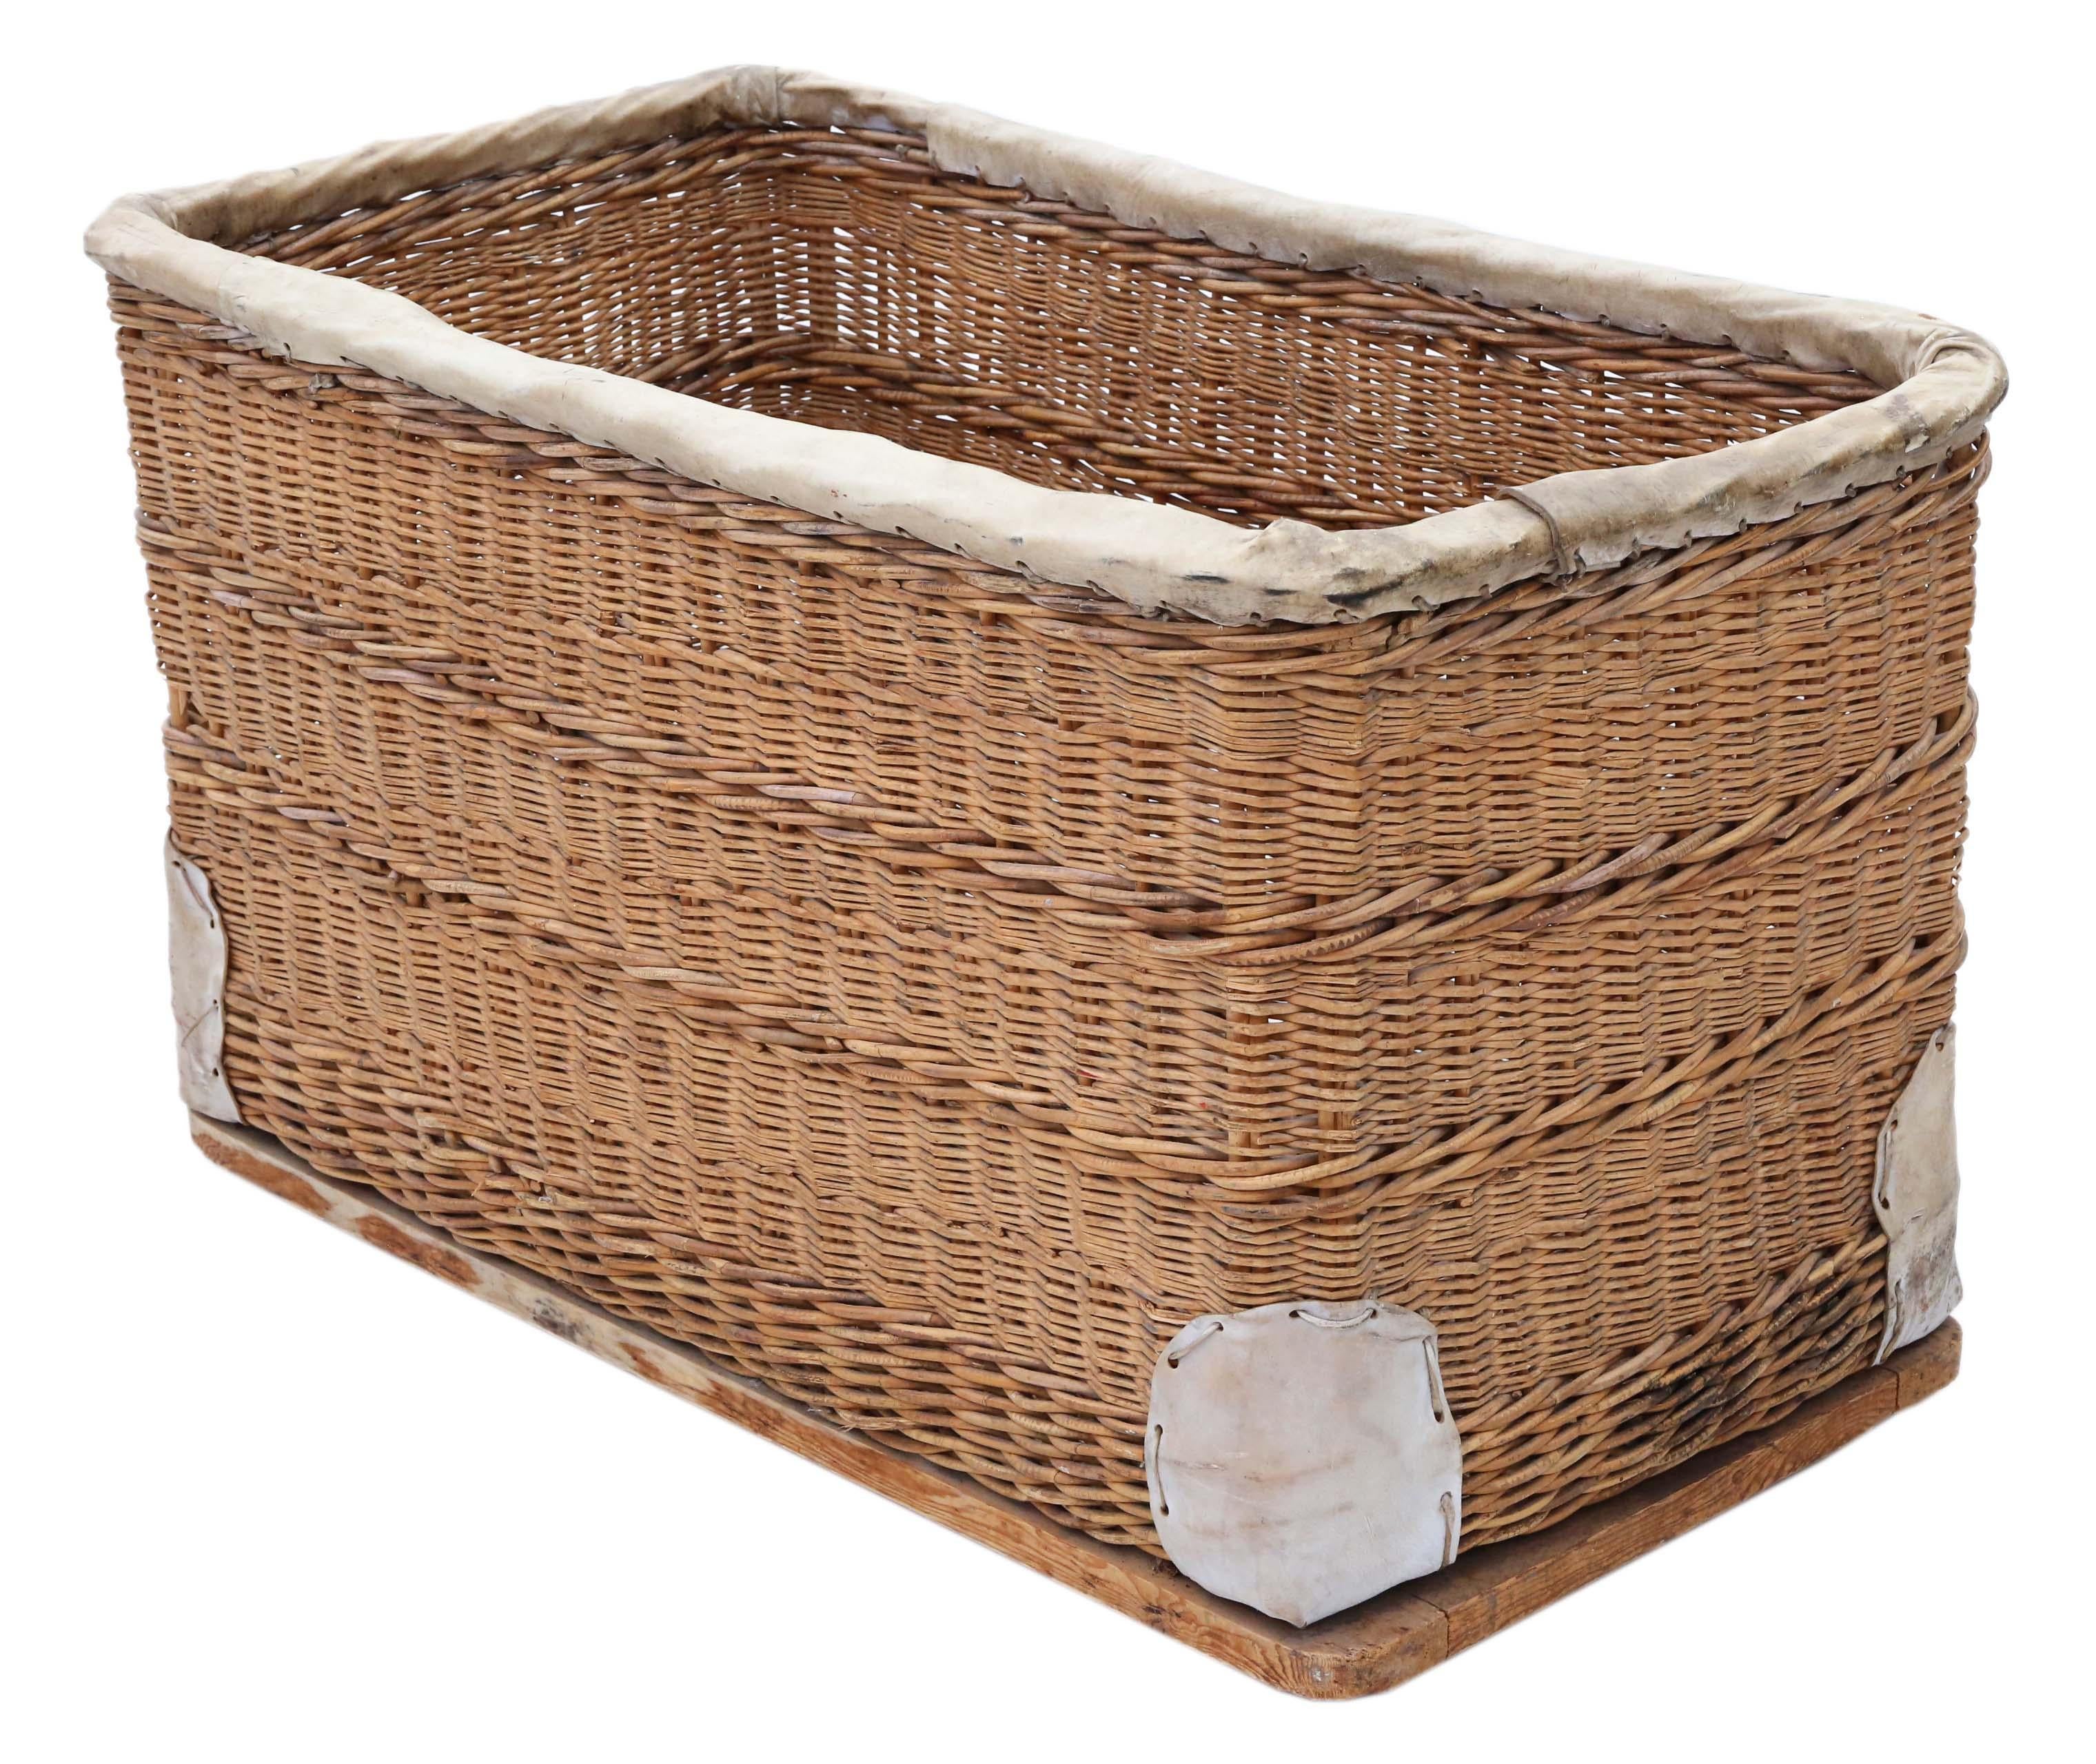 Vintage large strong cane and pigskin log or storage basket. Would make an oh so impressive huge log basket for a country house or hotel. These are so hard to find now.

Originally a quality GPO sorting basket, dating from circa 1950, this item is